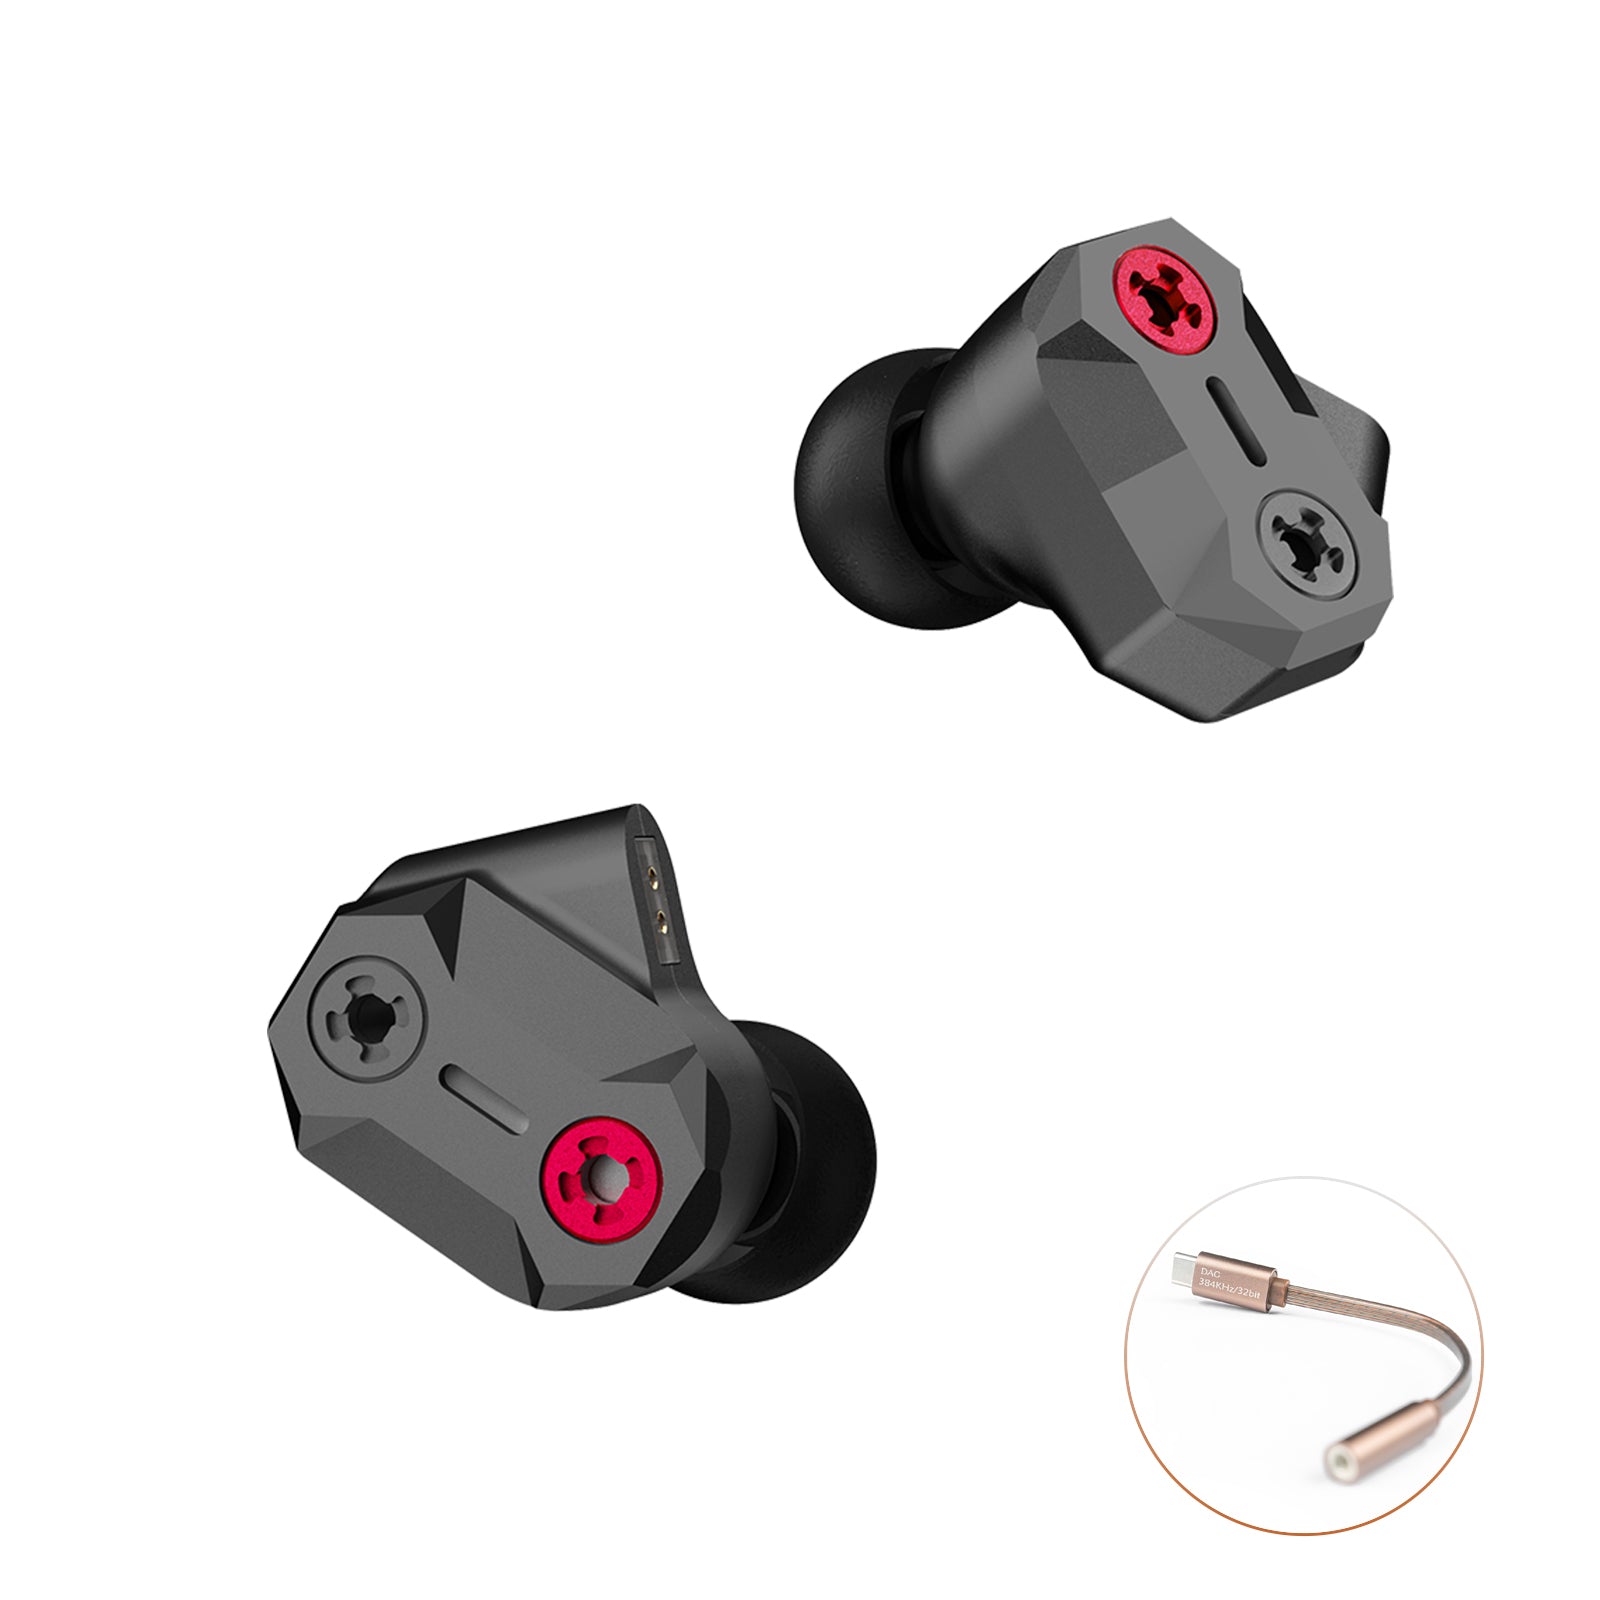 Tape Pro - In ear monitors created for heavy metal and rock enthusiasts